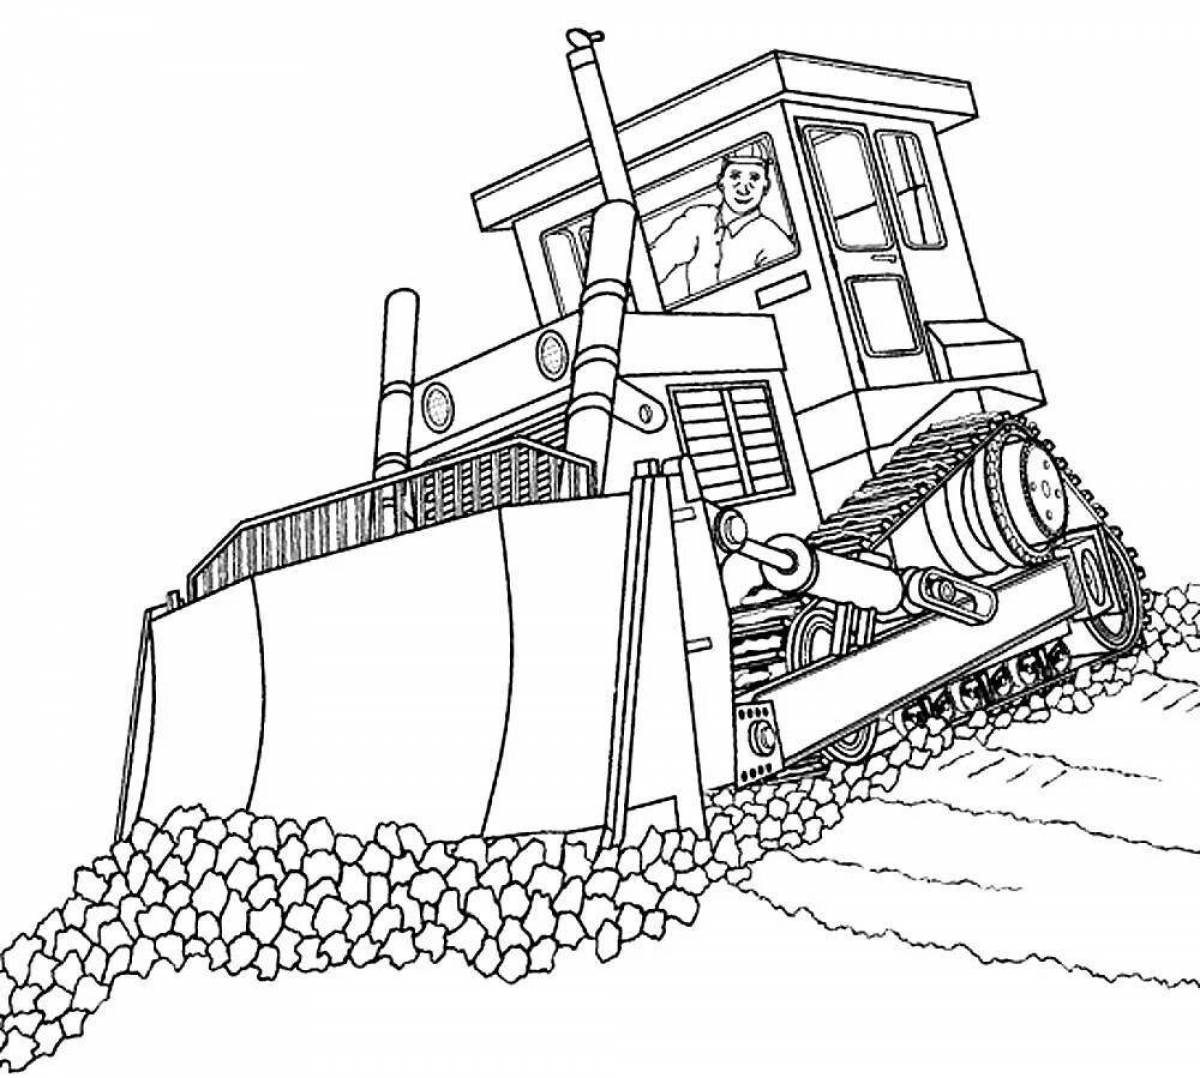 Amazing Construction Vehicles Coloring Page for Boys